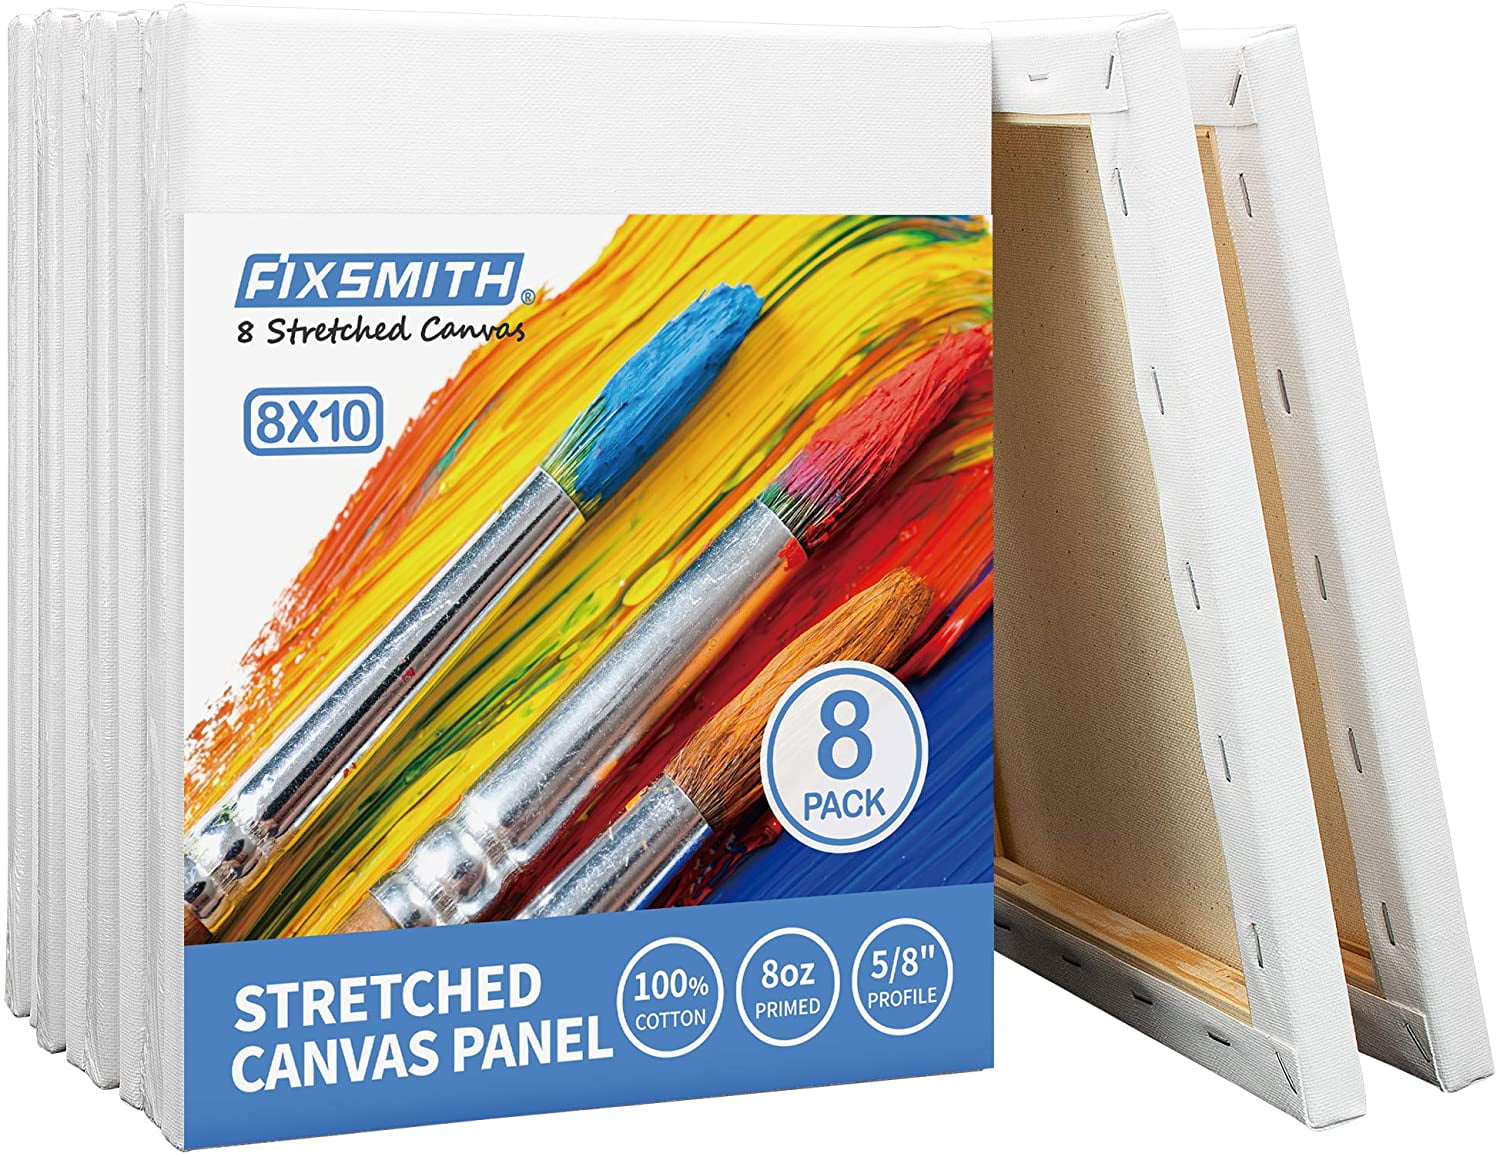 5/8 Inch Profile 100% Cotton Pre Primed Stretched Canvas 8x10 / 10 Pack Art Supplies for Acrylic Paint Canvas Boards for Painting Oil Painting 